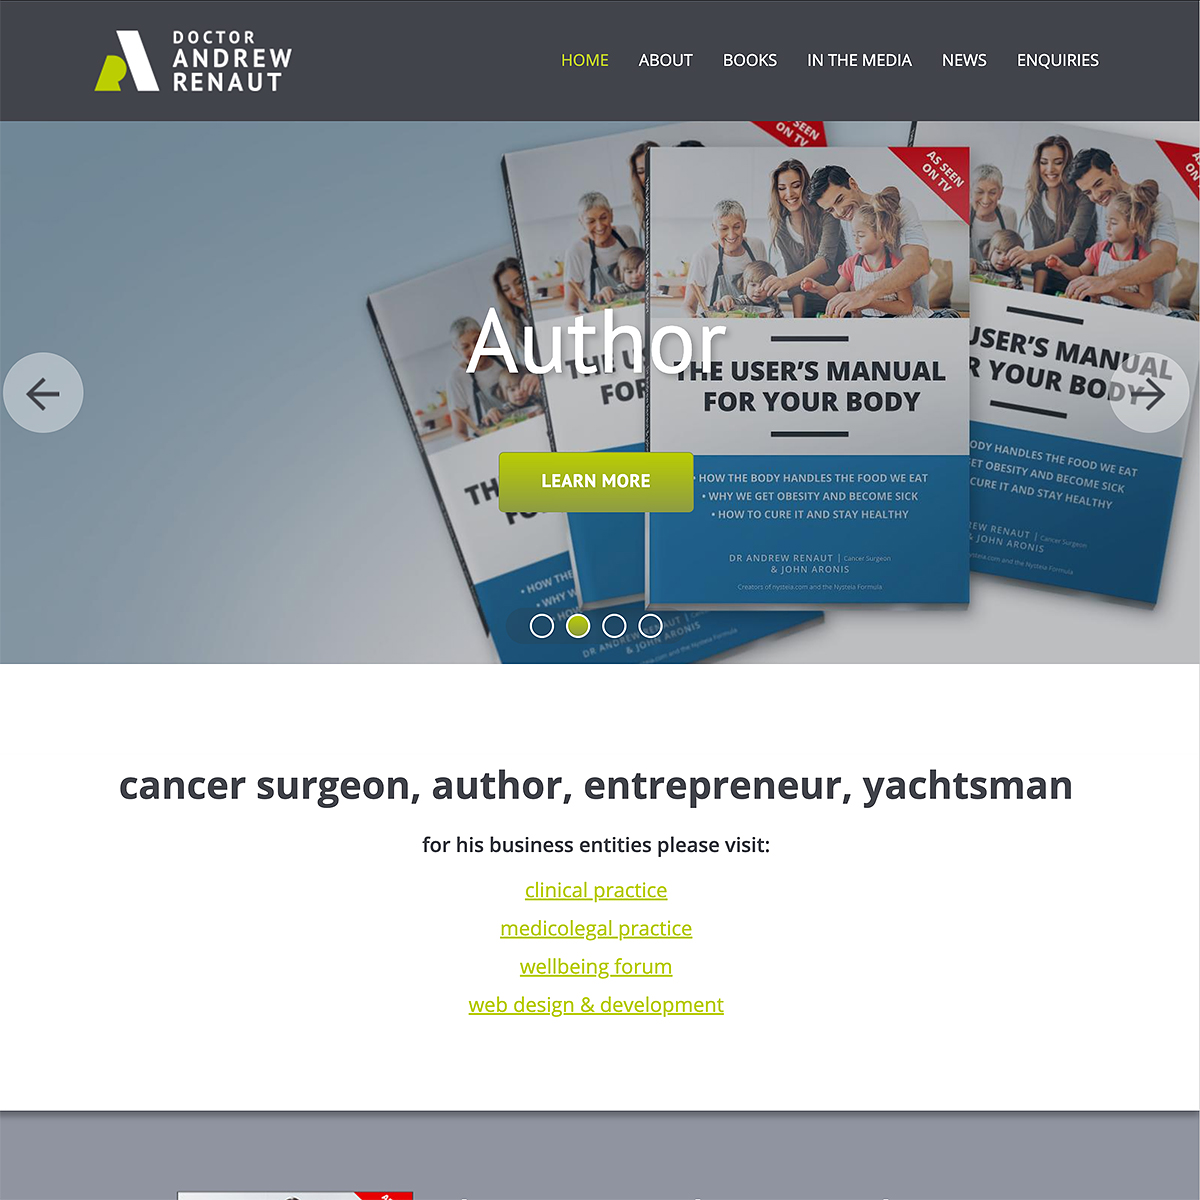 Dr Andrew Renaut - Homepage Banner - Author